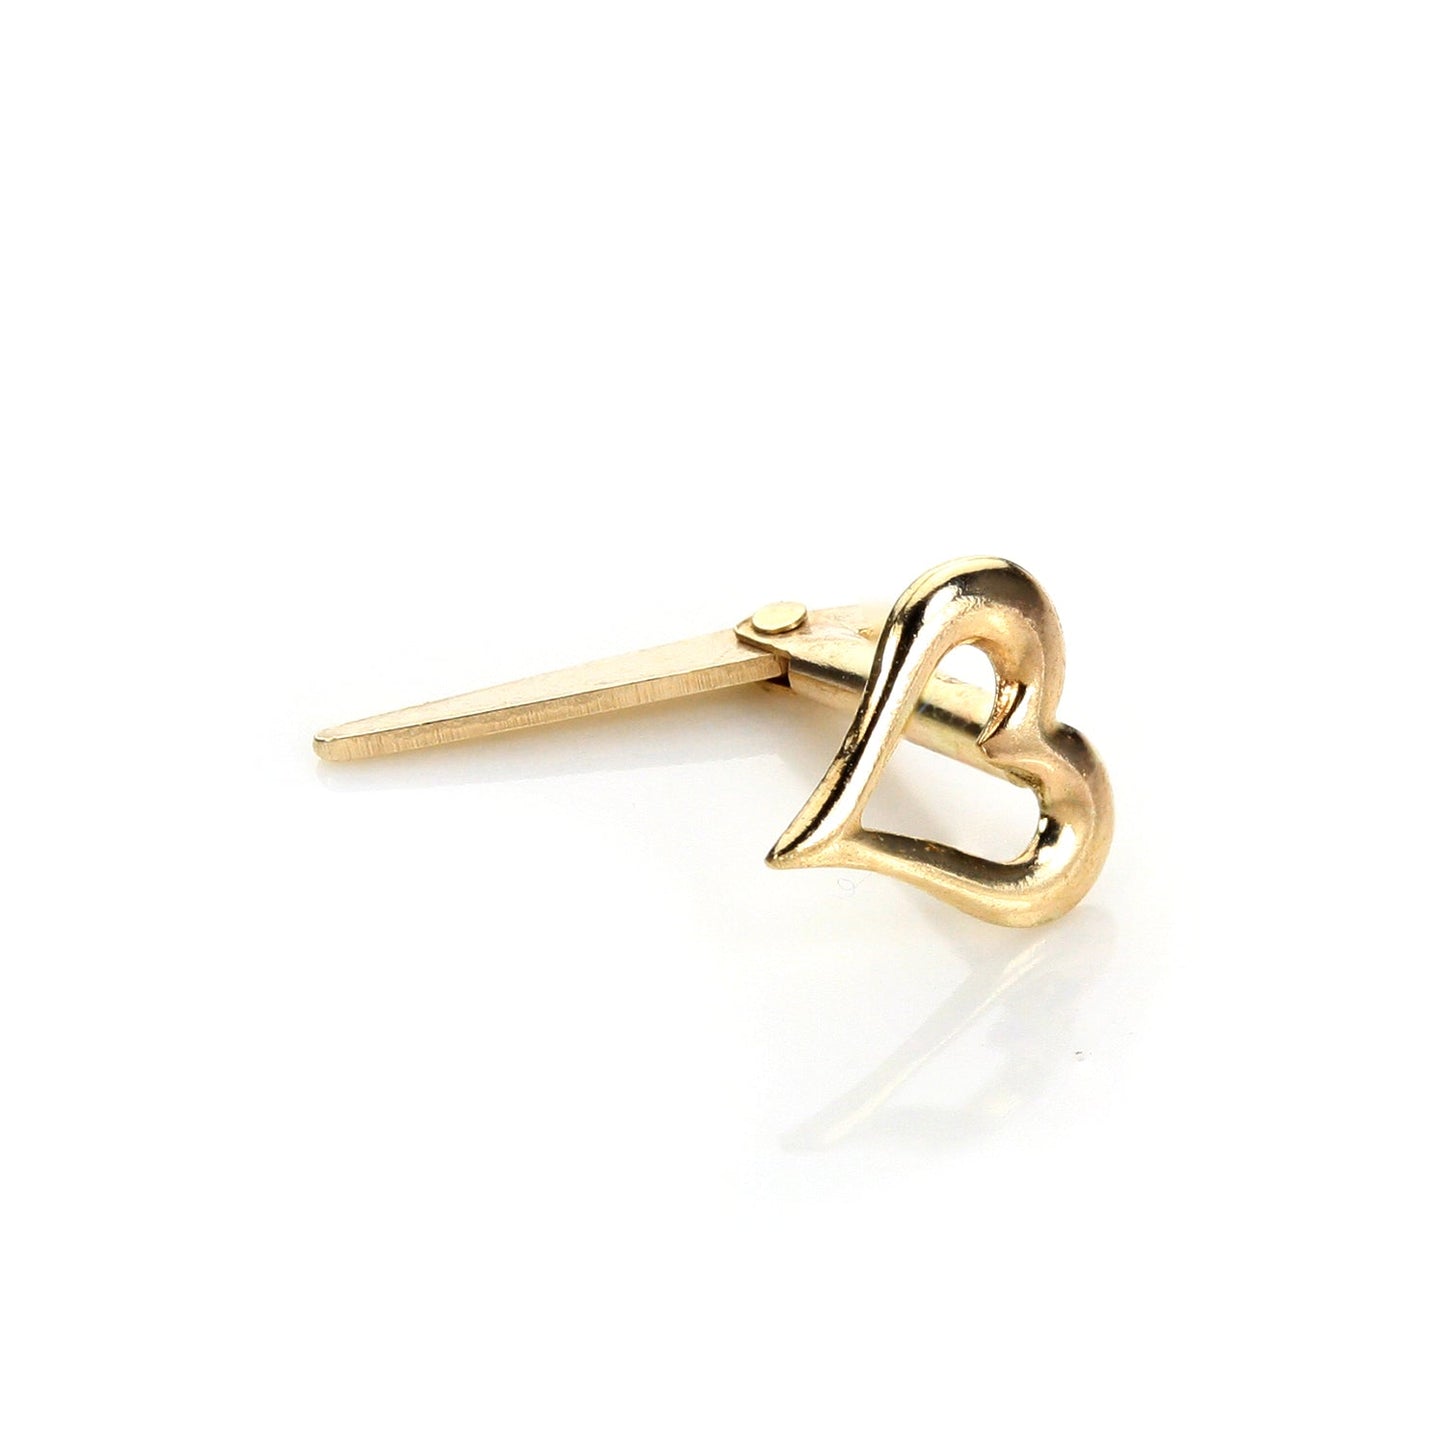 Andralok 9ct Yellow Gold Pierced Heart Nose Stud